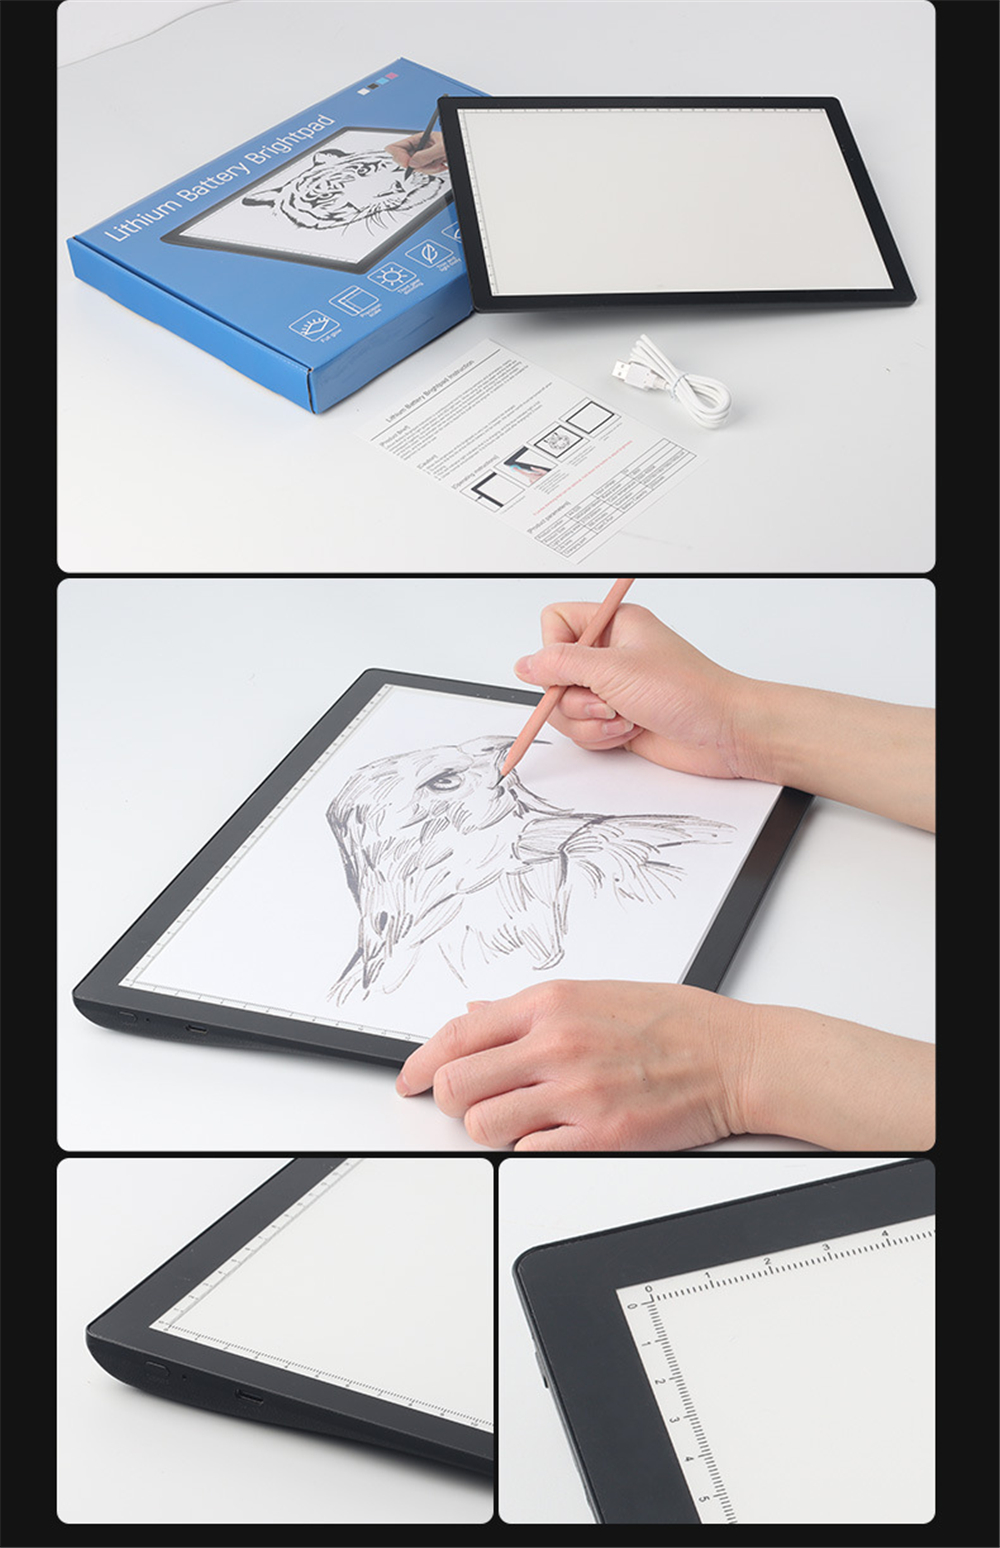 A4 LED Drawing Tablet with Scale Support Charging FIve Gear Dimming Art Stencil Portable Digital Graphics Drawing Board